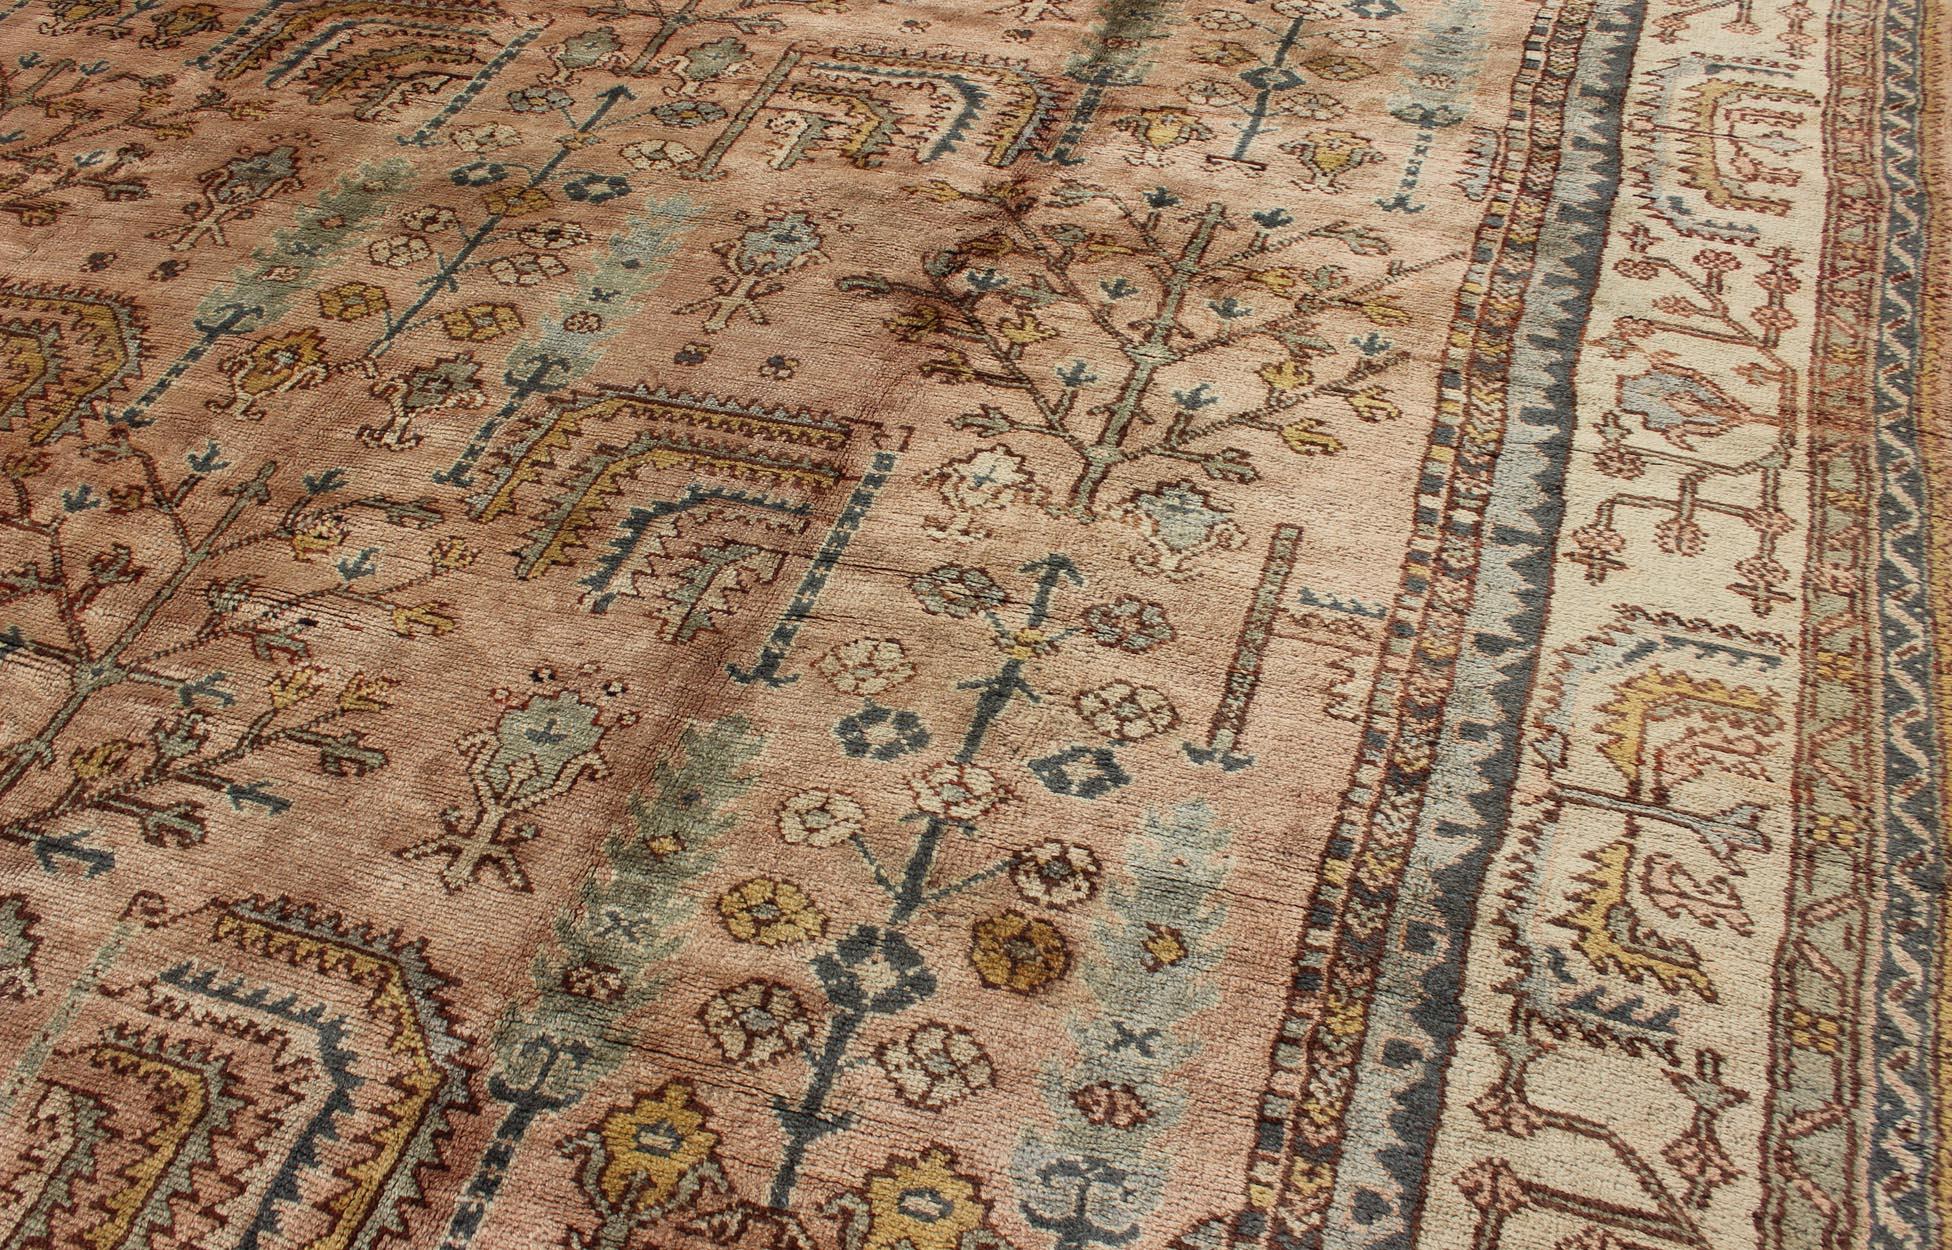 Early 20th Century Turkish Oushak Antique Rug with Botanical Design in Salmon, Blue and Brown